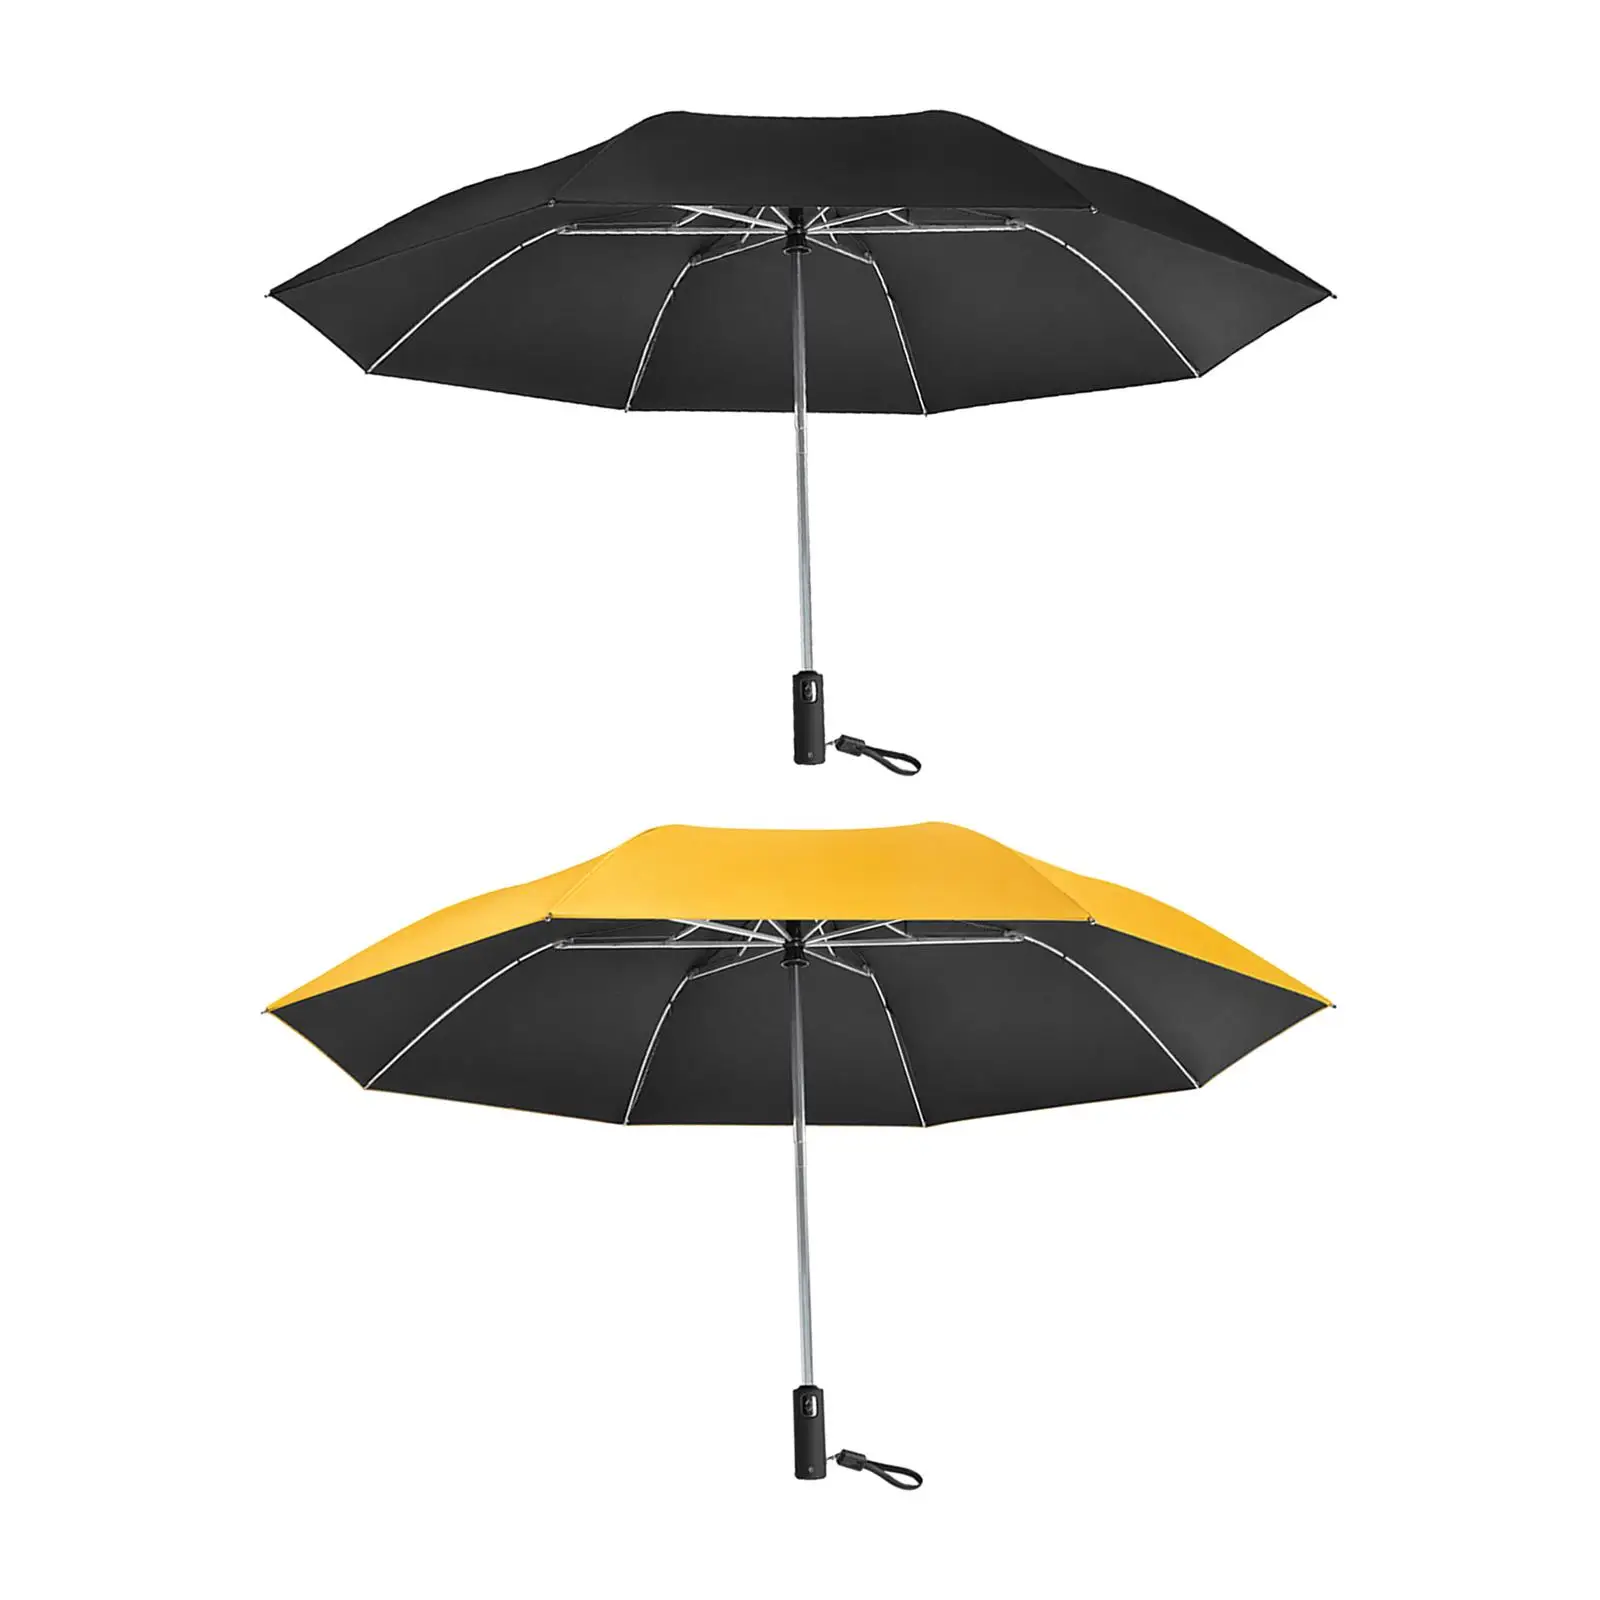 

Automatic Folding Umbrella Lightweight Portable 8 Ribs Travel Umbrella for Backpacking Sunny Days Climbing Adults Kids Trips